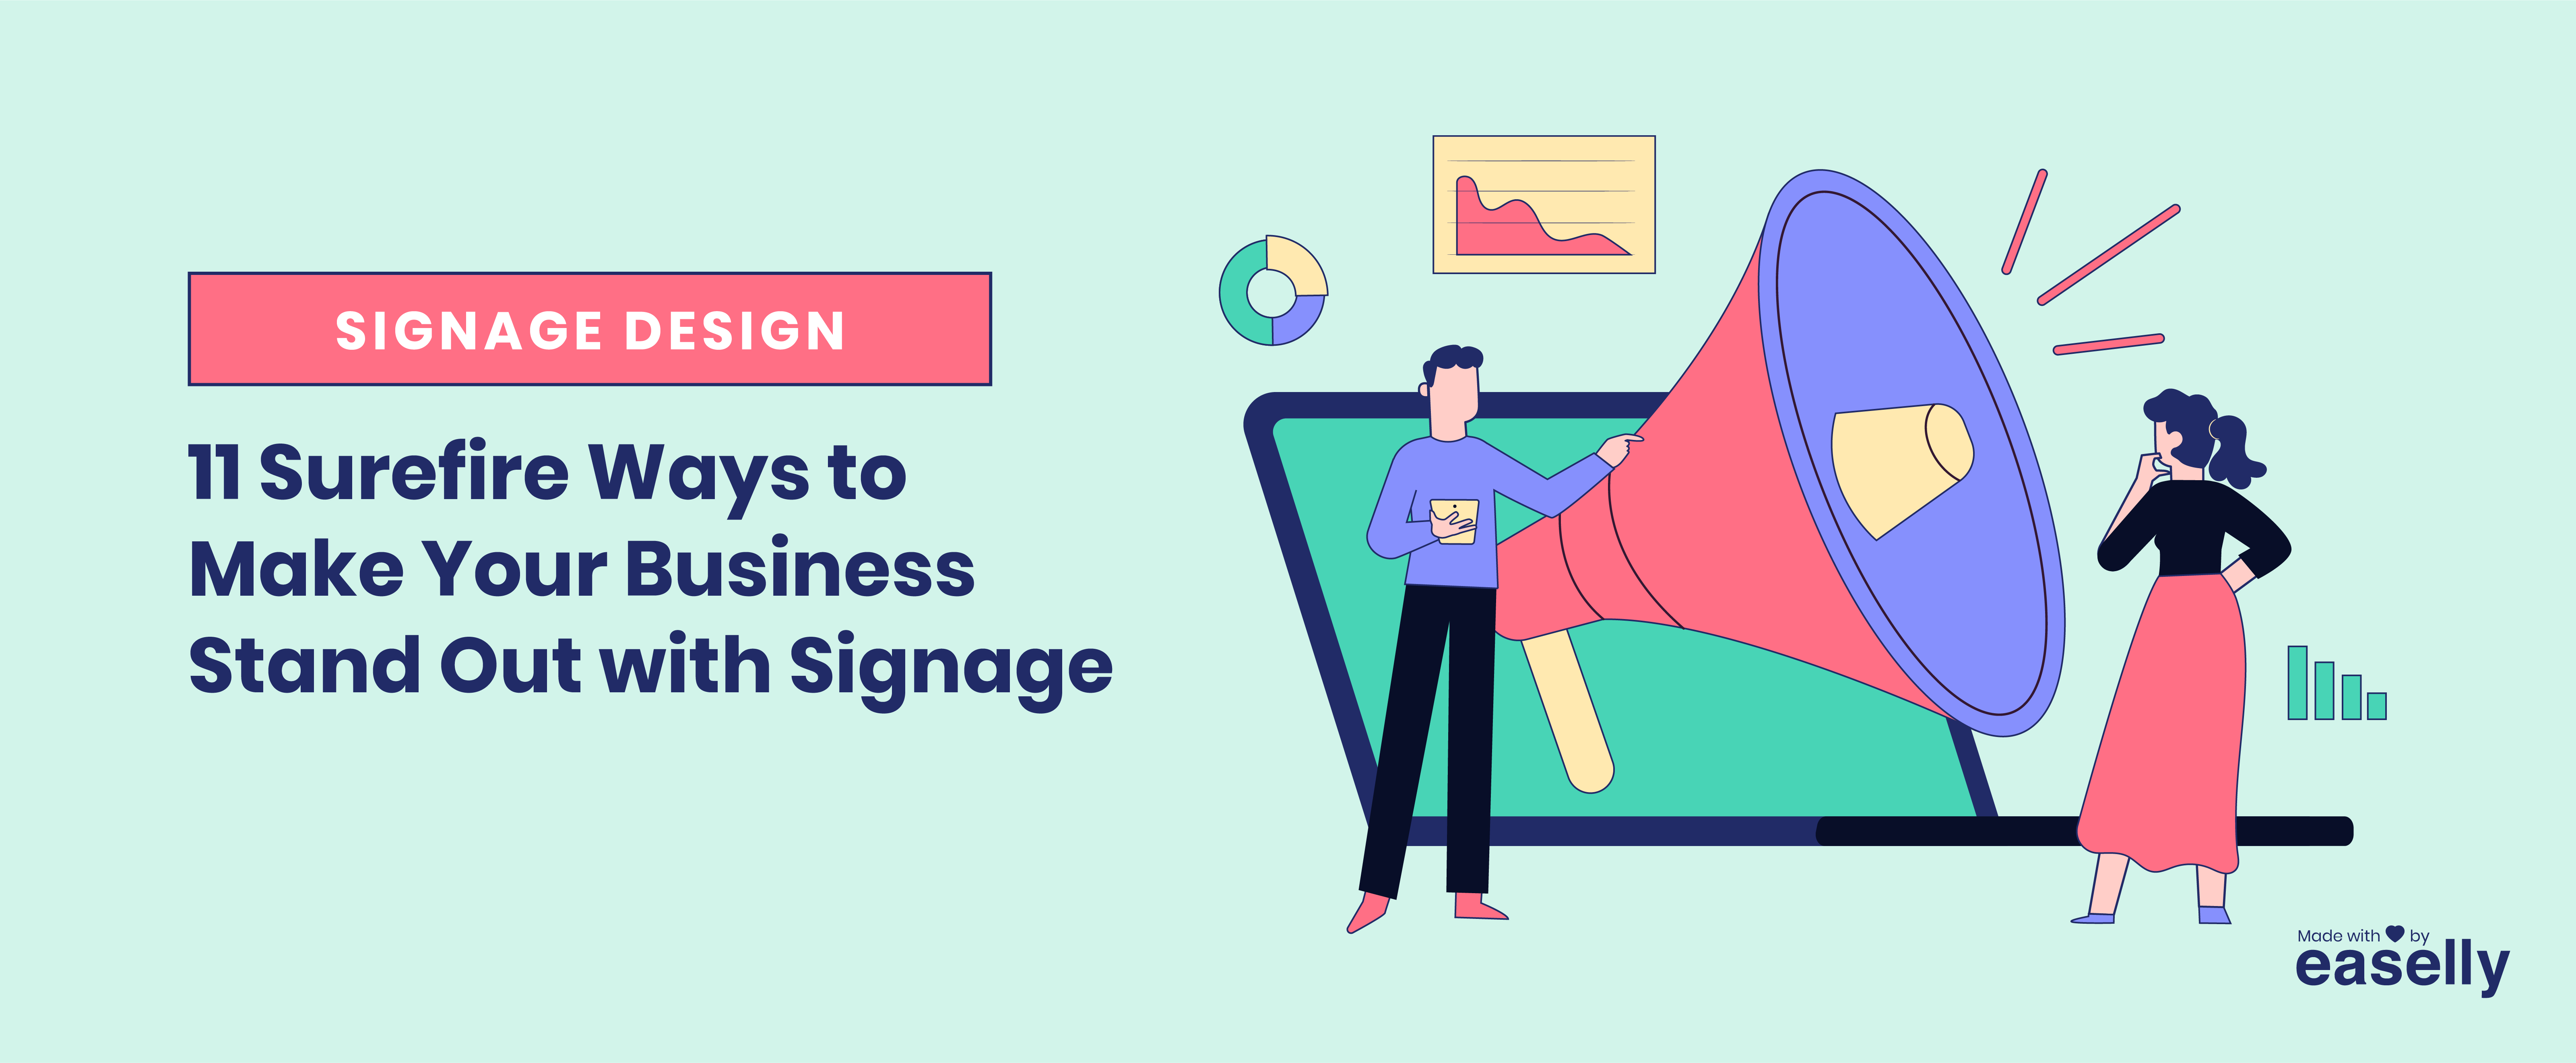 11 Surefire Ways to Make Your Business Stand Out with Signage